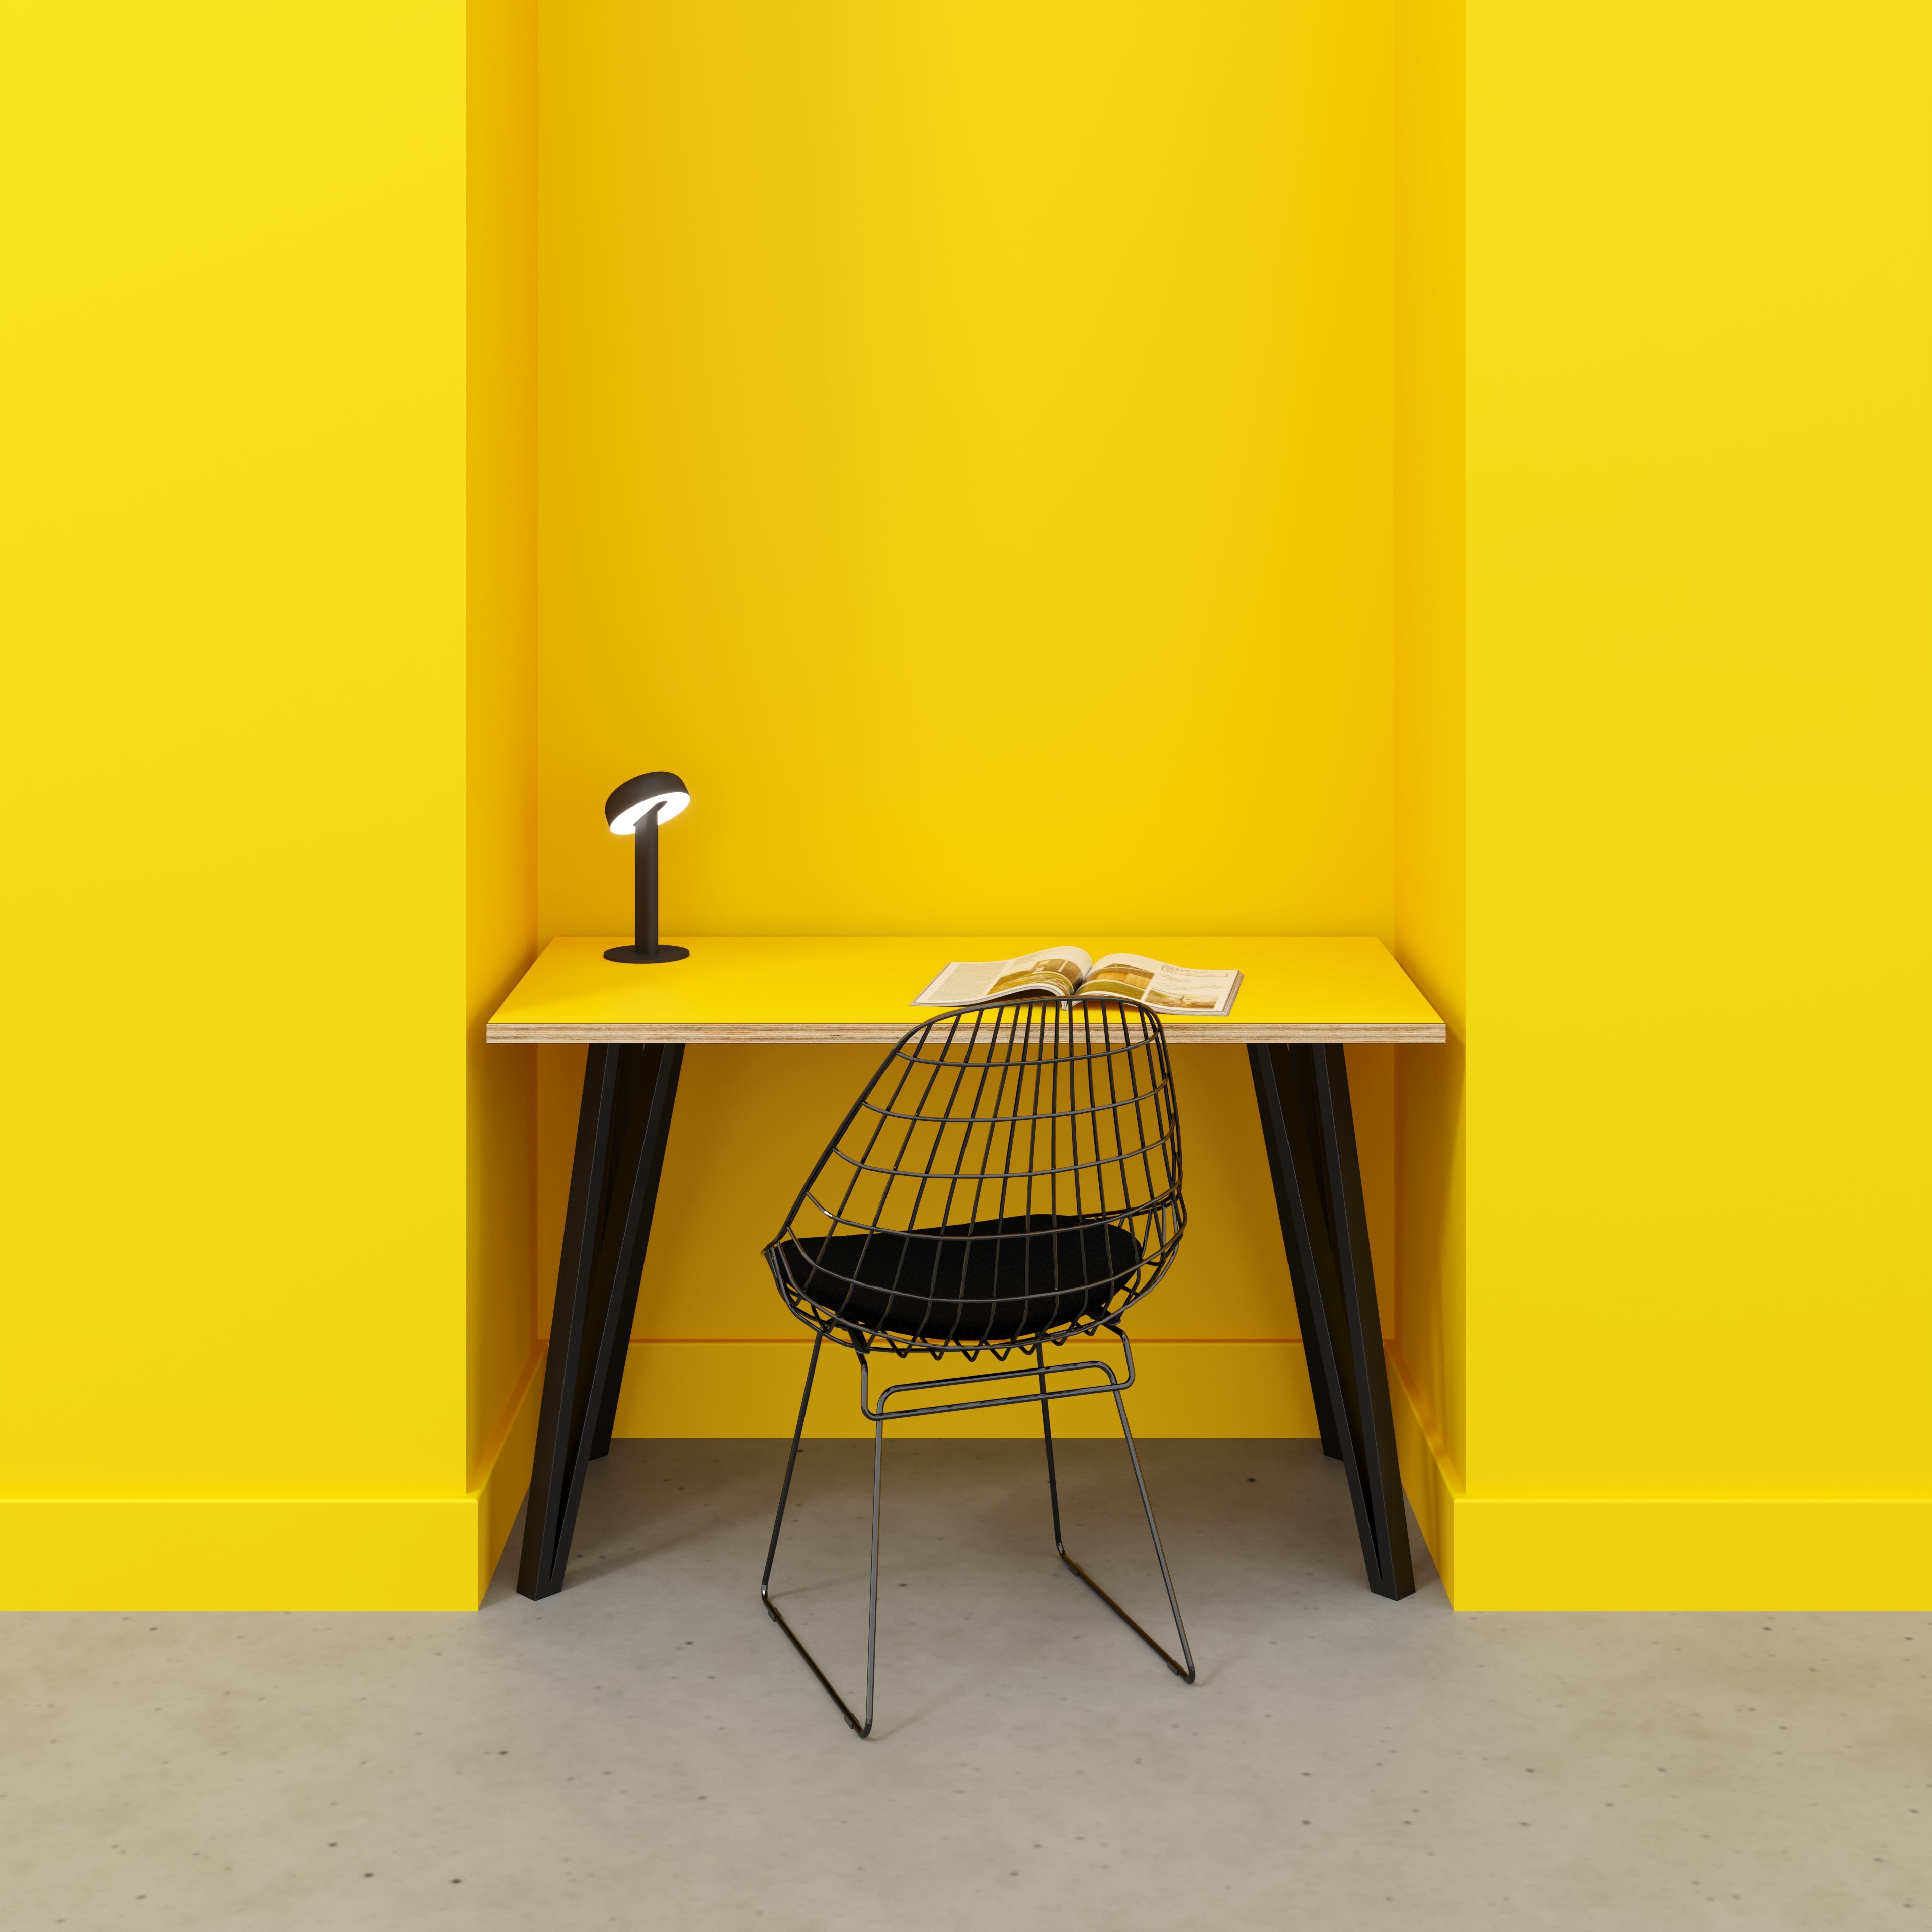 Desk with Black Box Hairpin Legs - Formica Chrome Yellow - 1200(w) x 600(d) x 735(h)